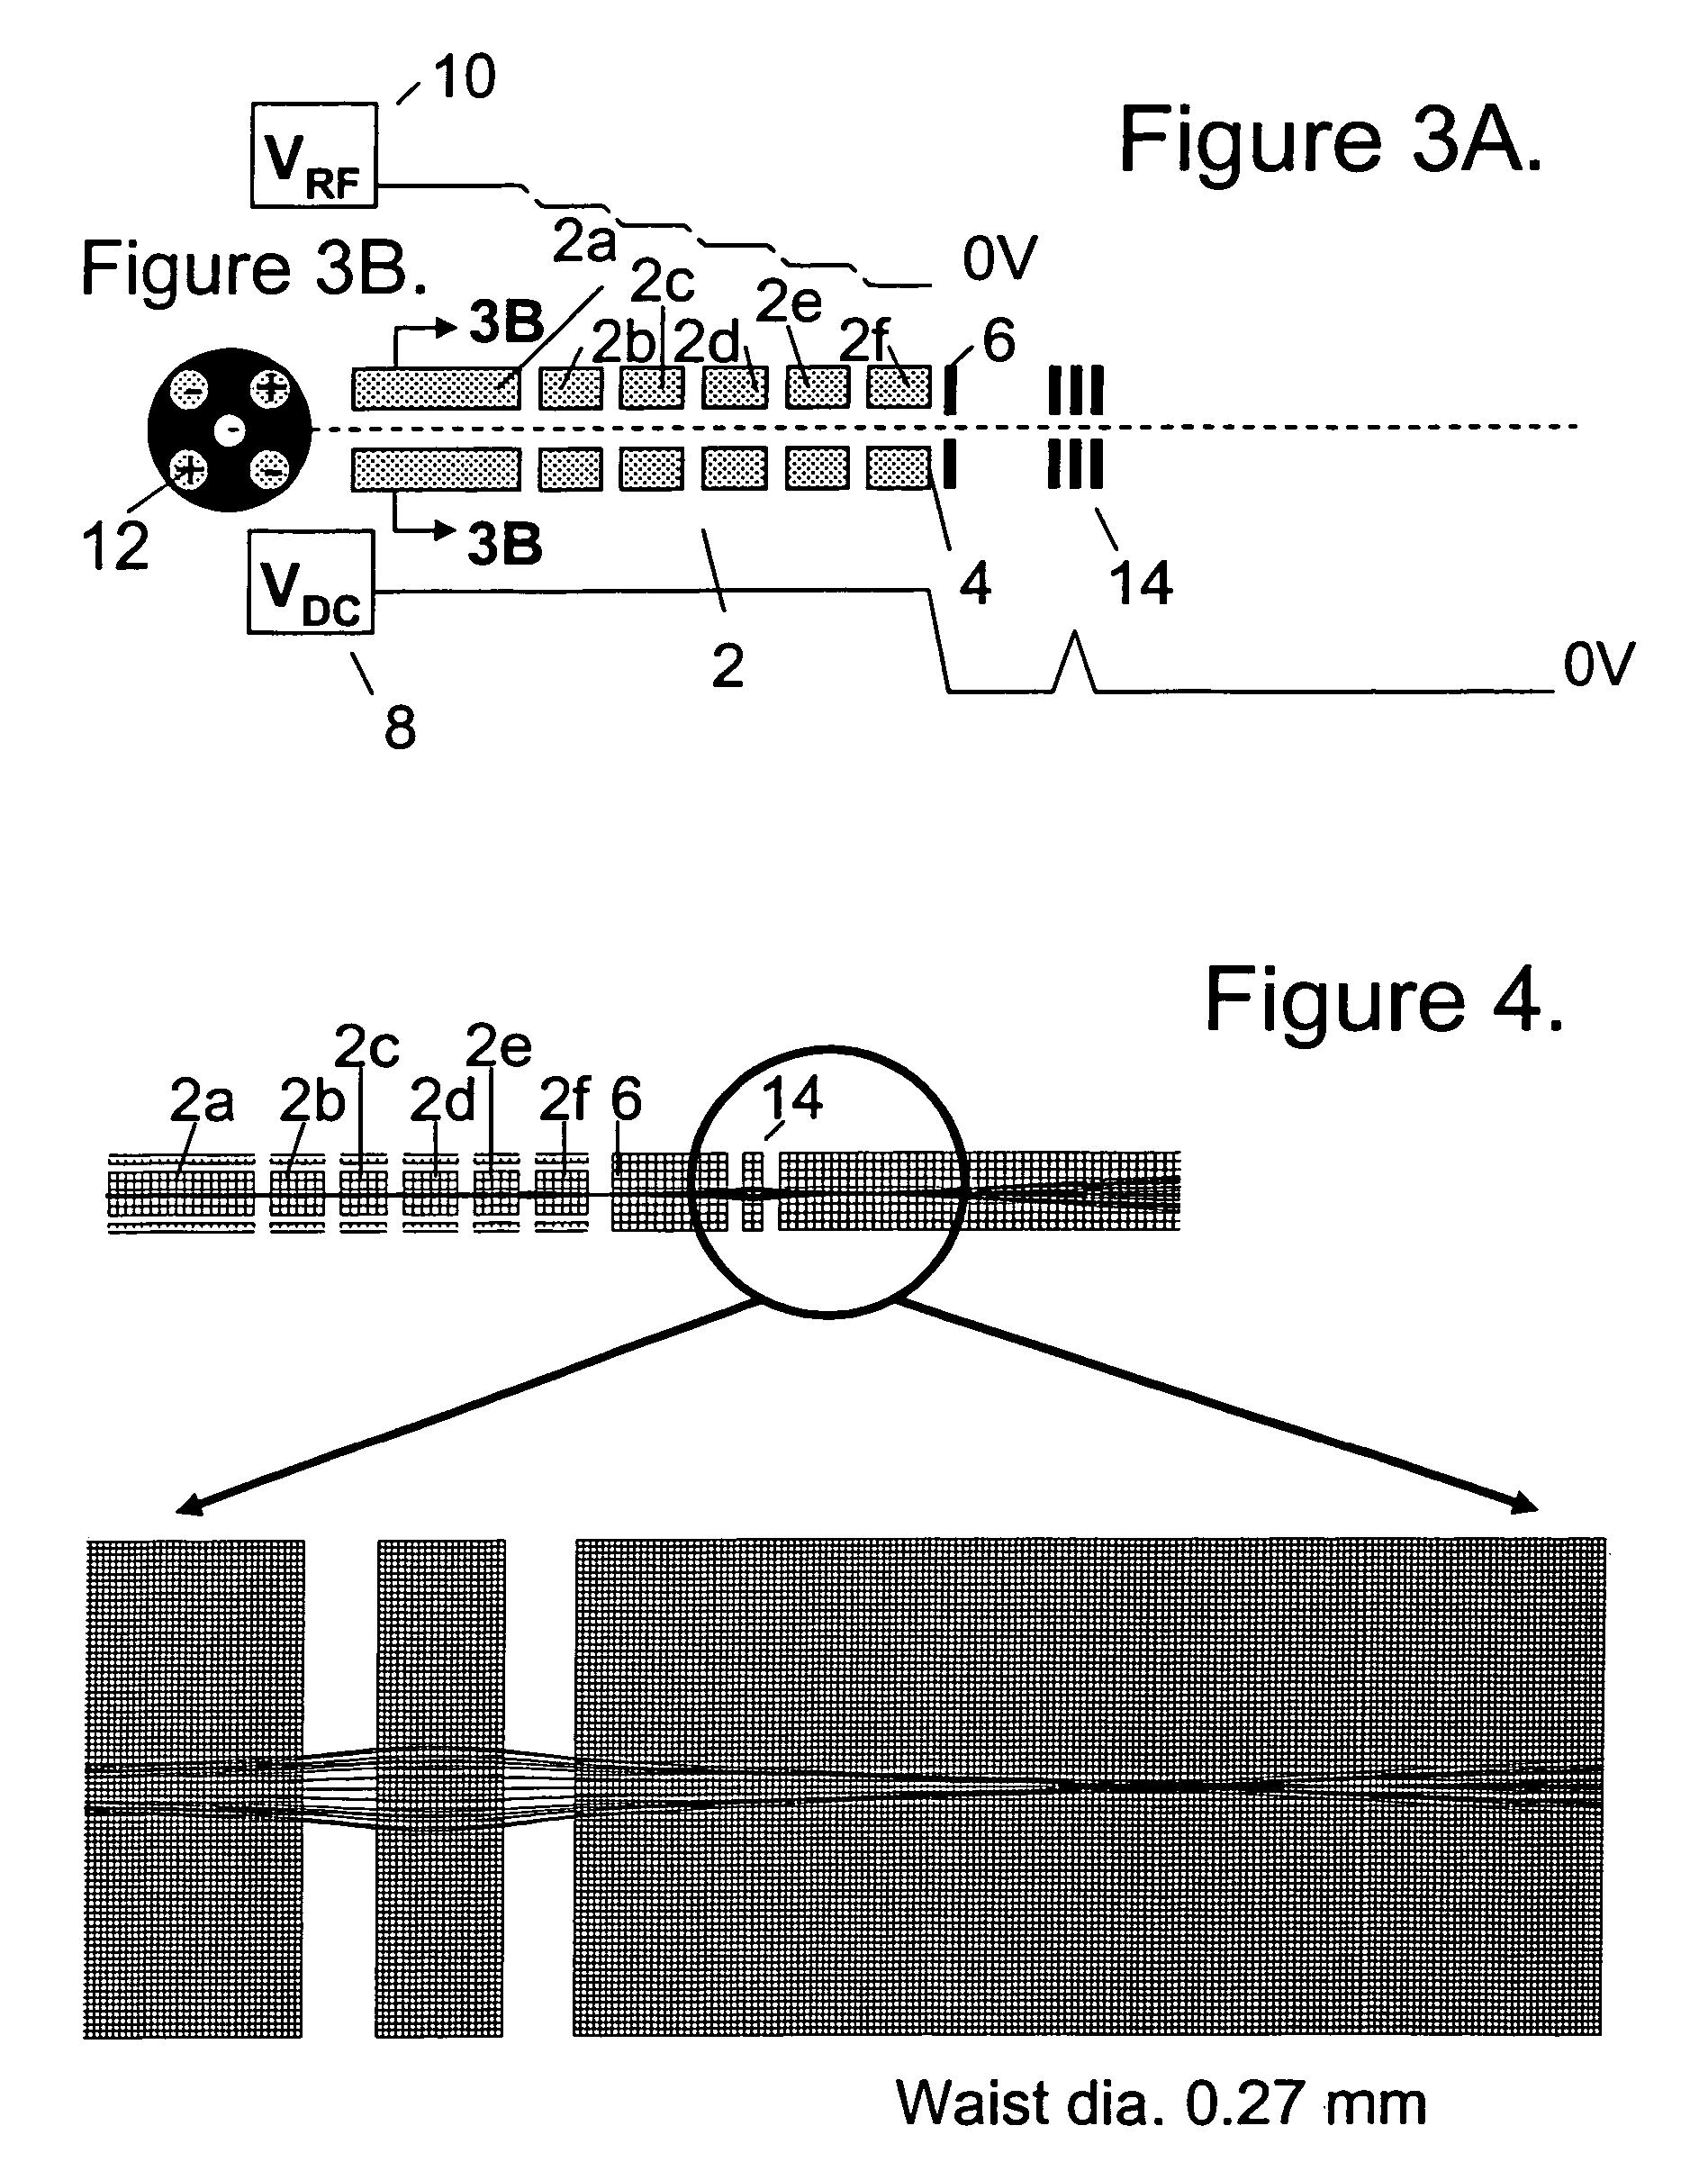 Method and apparatus for producing an ion beam from an ion guide